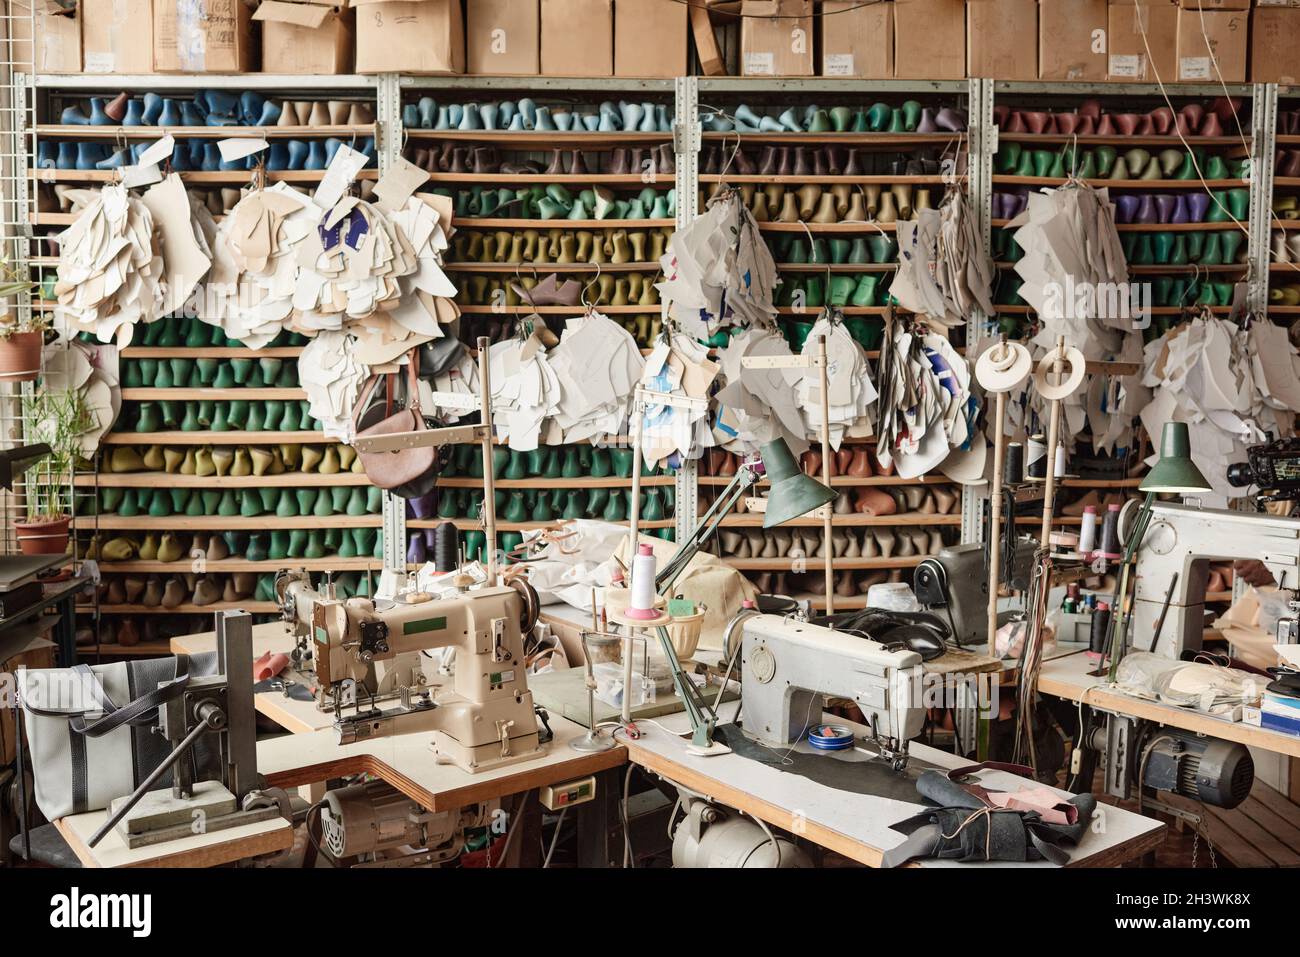 Image of tailor studio with sewing equipments and patterns for tailors and shoemakers Stock Photo